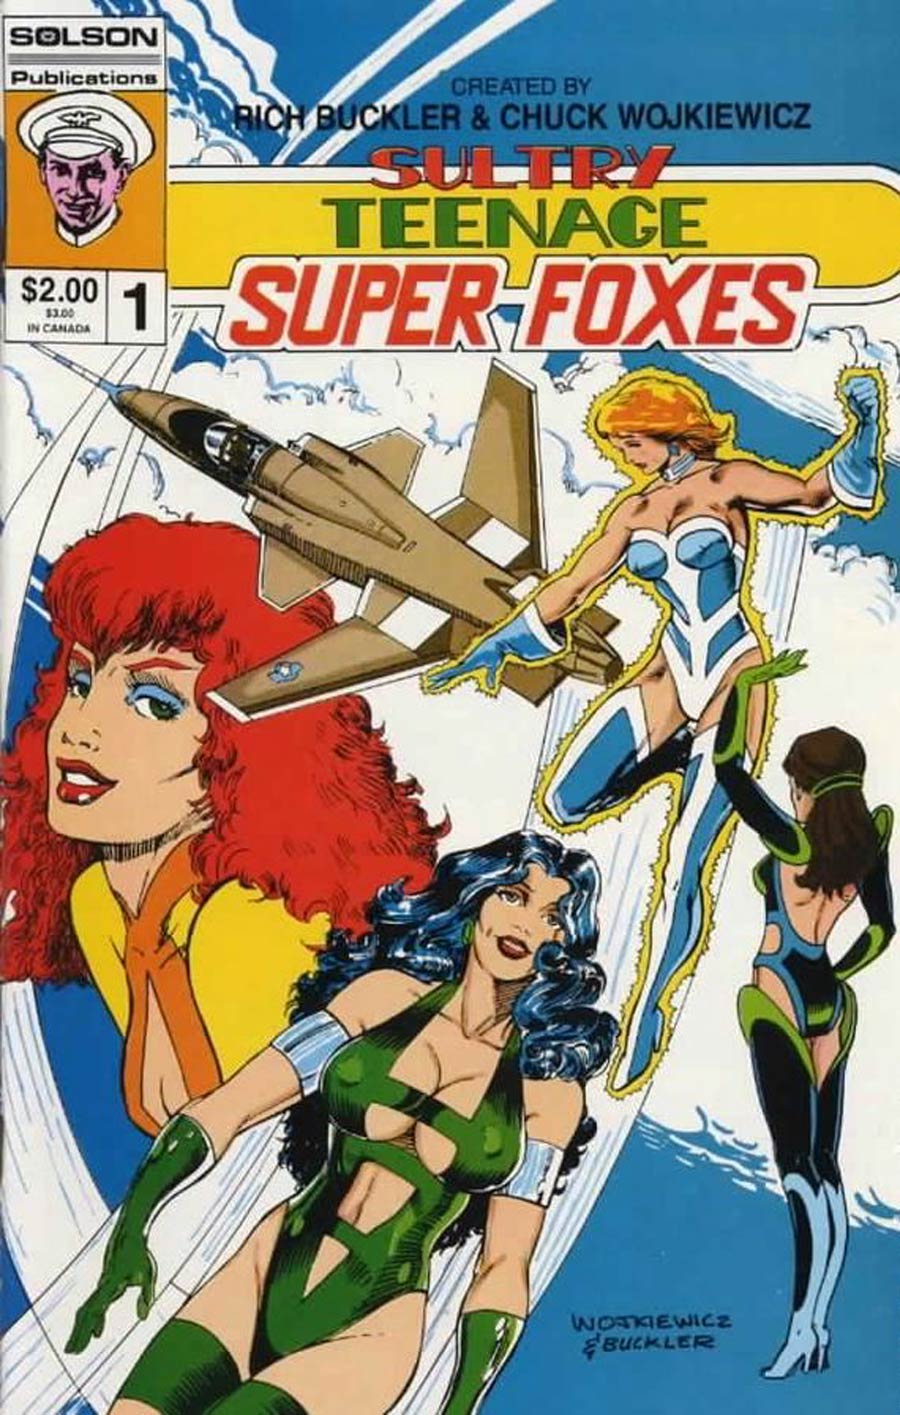 Sultry Teenage Super Foxes #1